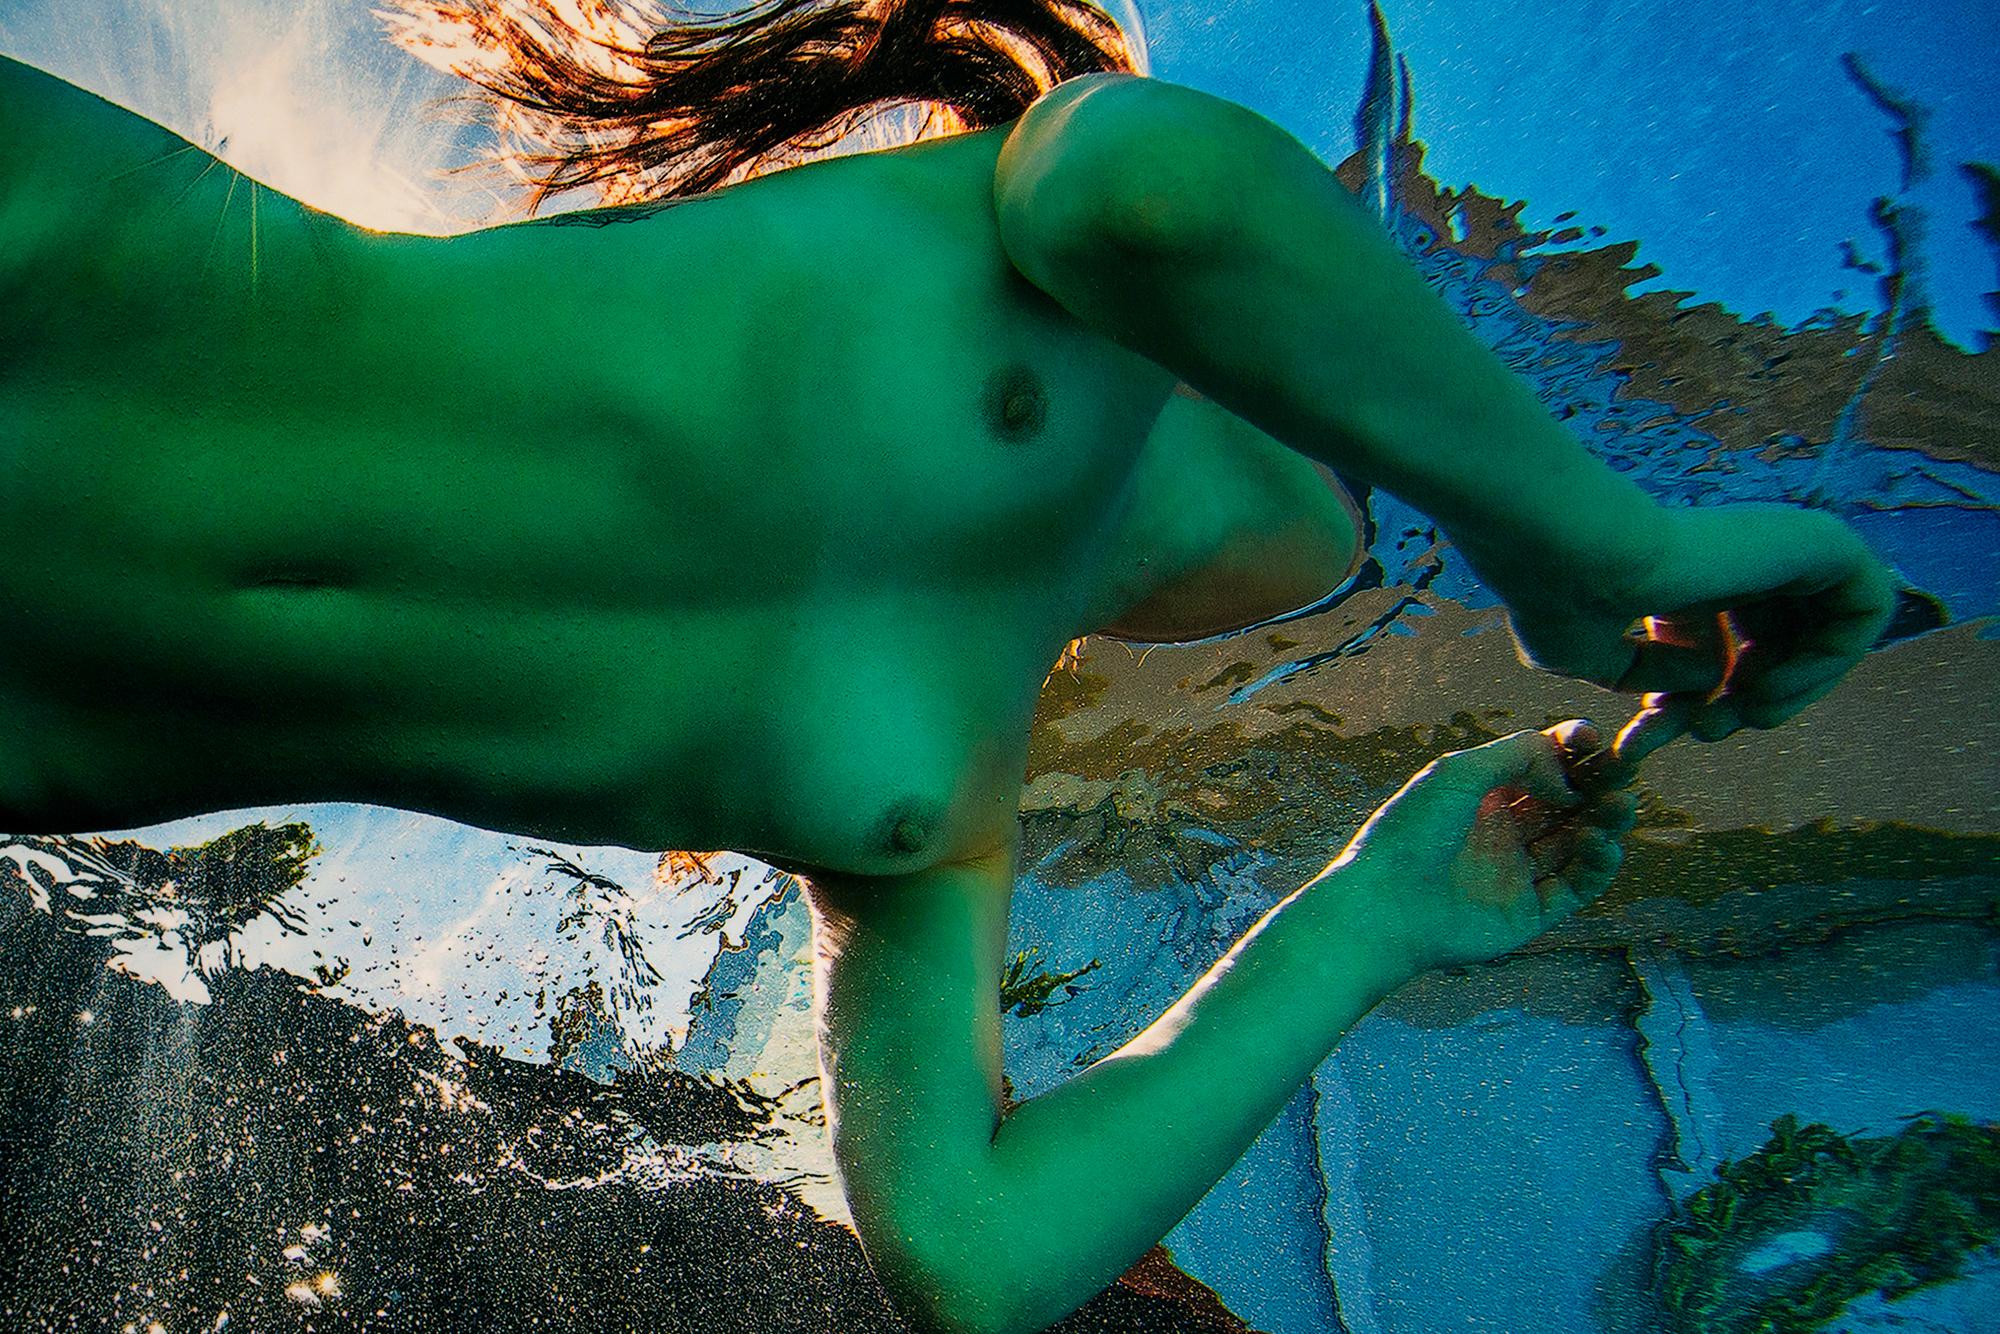 The Real Mermaid - underwater nude photograph - archival pigment print 43x64